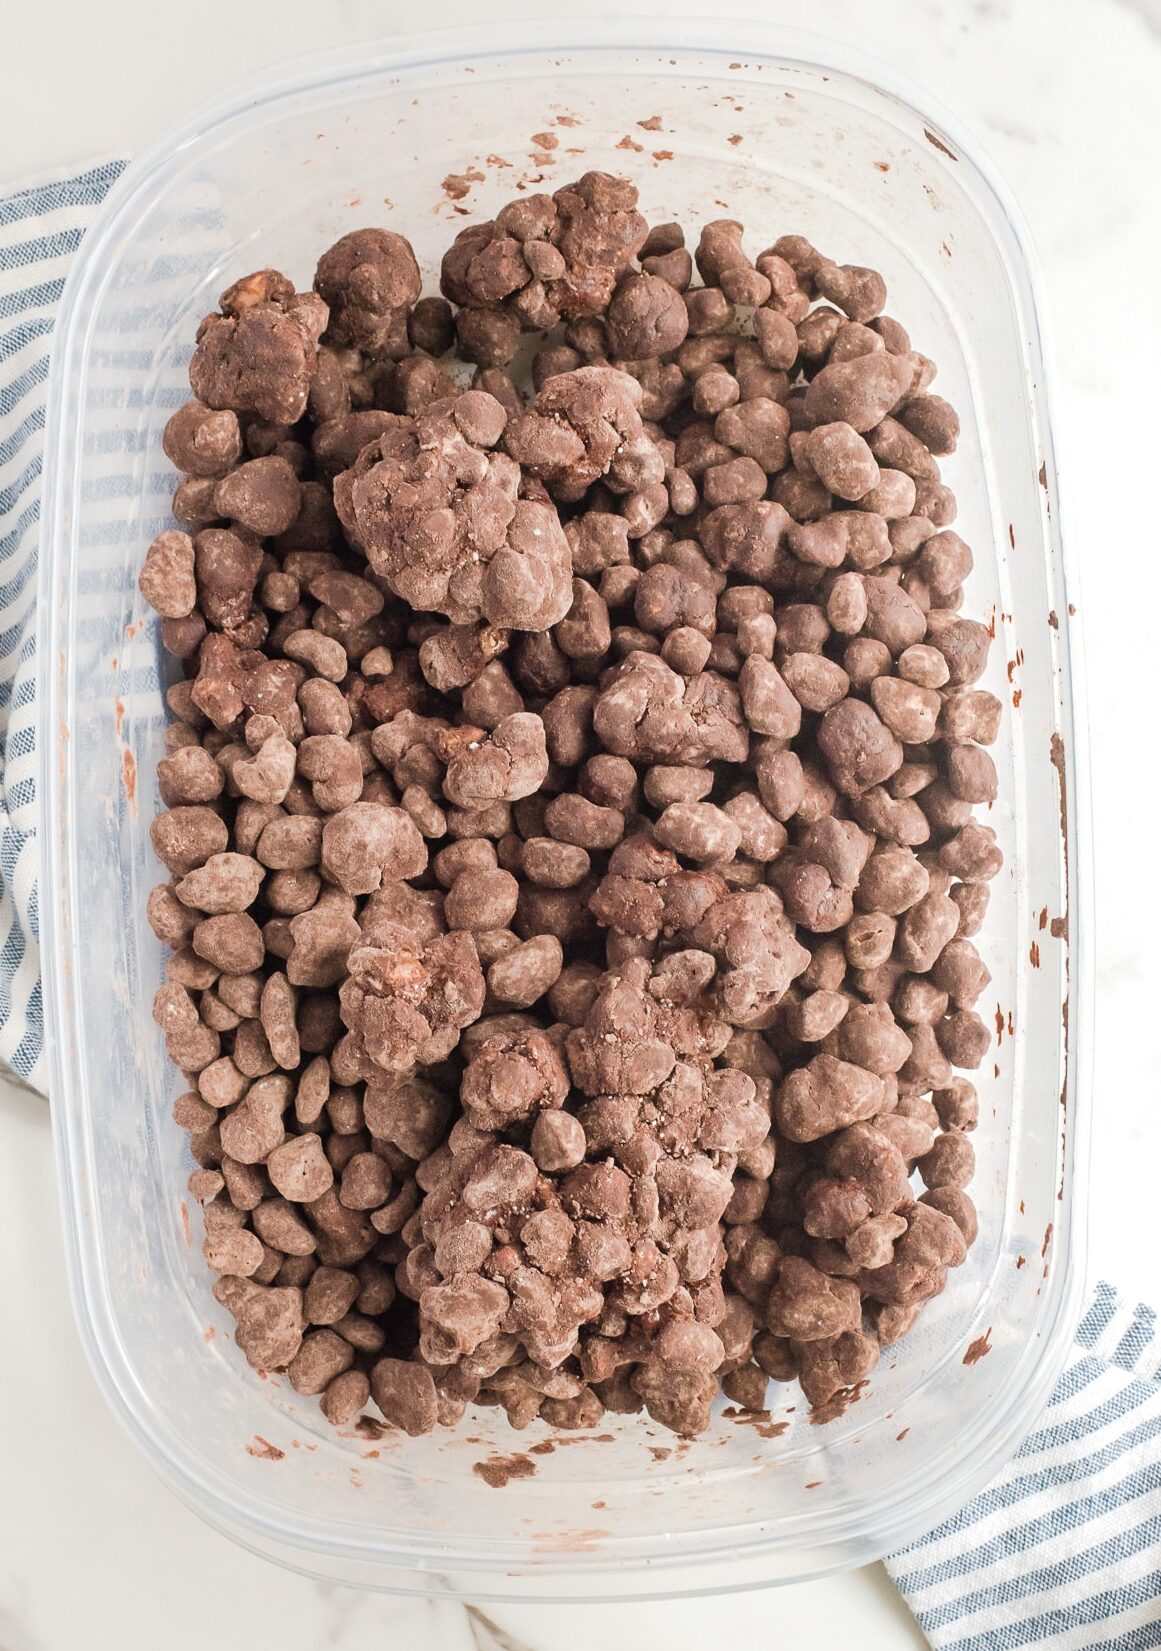 Chocolate reindeer poop snack mix in a large container coated in cocoa powder.